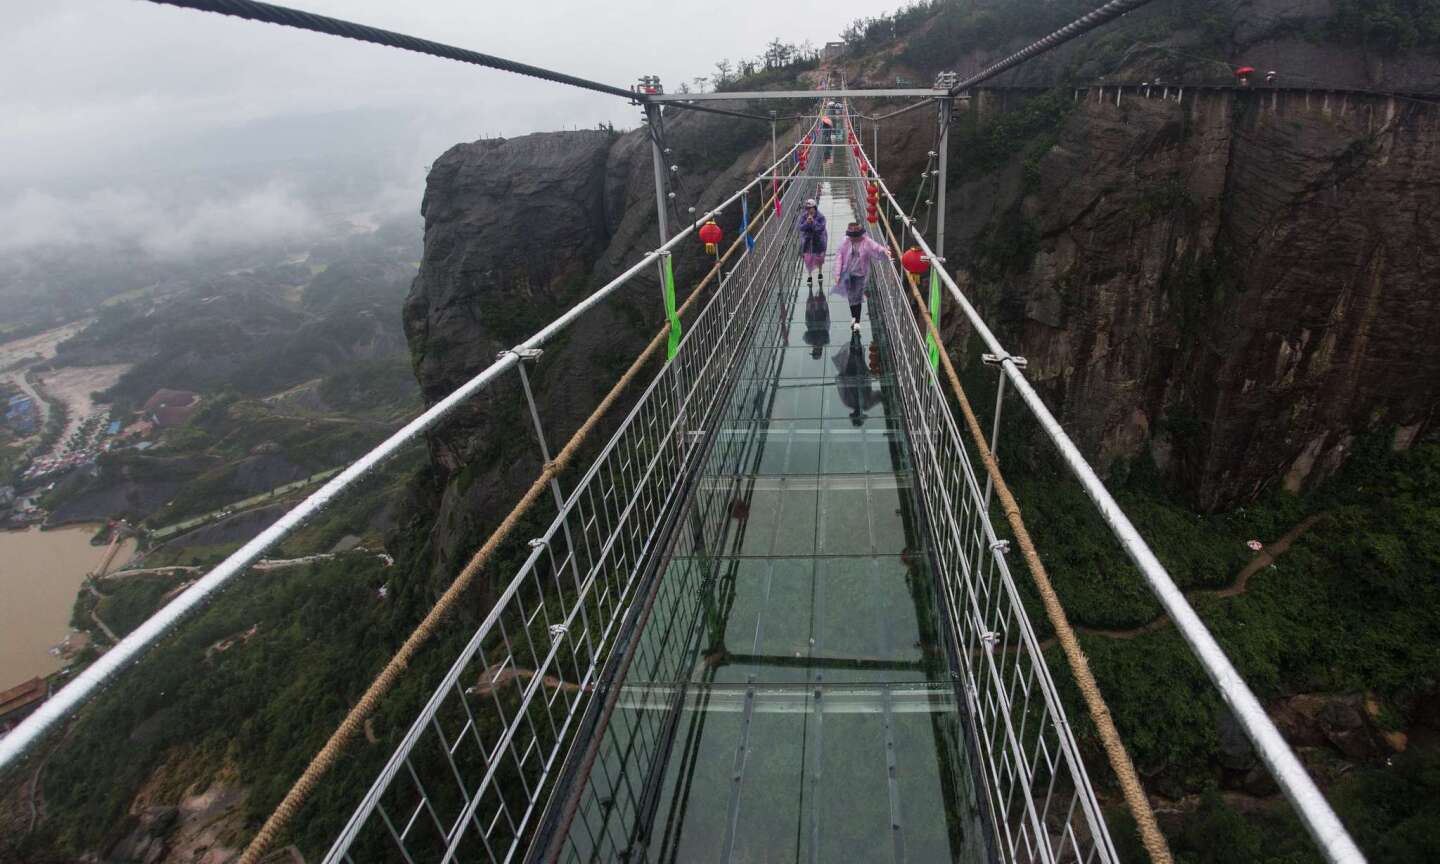 Chinese tourists walk across a glass-bottomed suspension bridge in the Shinuizhai mountains in Pingjang county, Hunan province some 150 kilometers from Changsha on October 7, 2015. The bridge, originally a wooden walkway spanning some 300 meters across the 180-meter deep valley, reopened two weeks ago following renovations as a glass-bottomed tourist attraction.